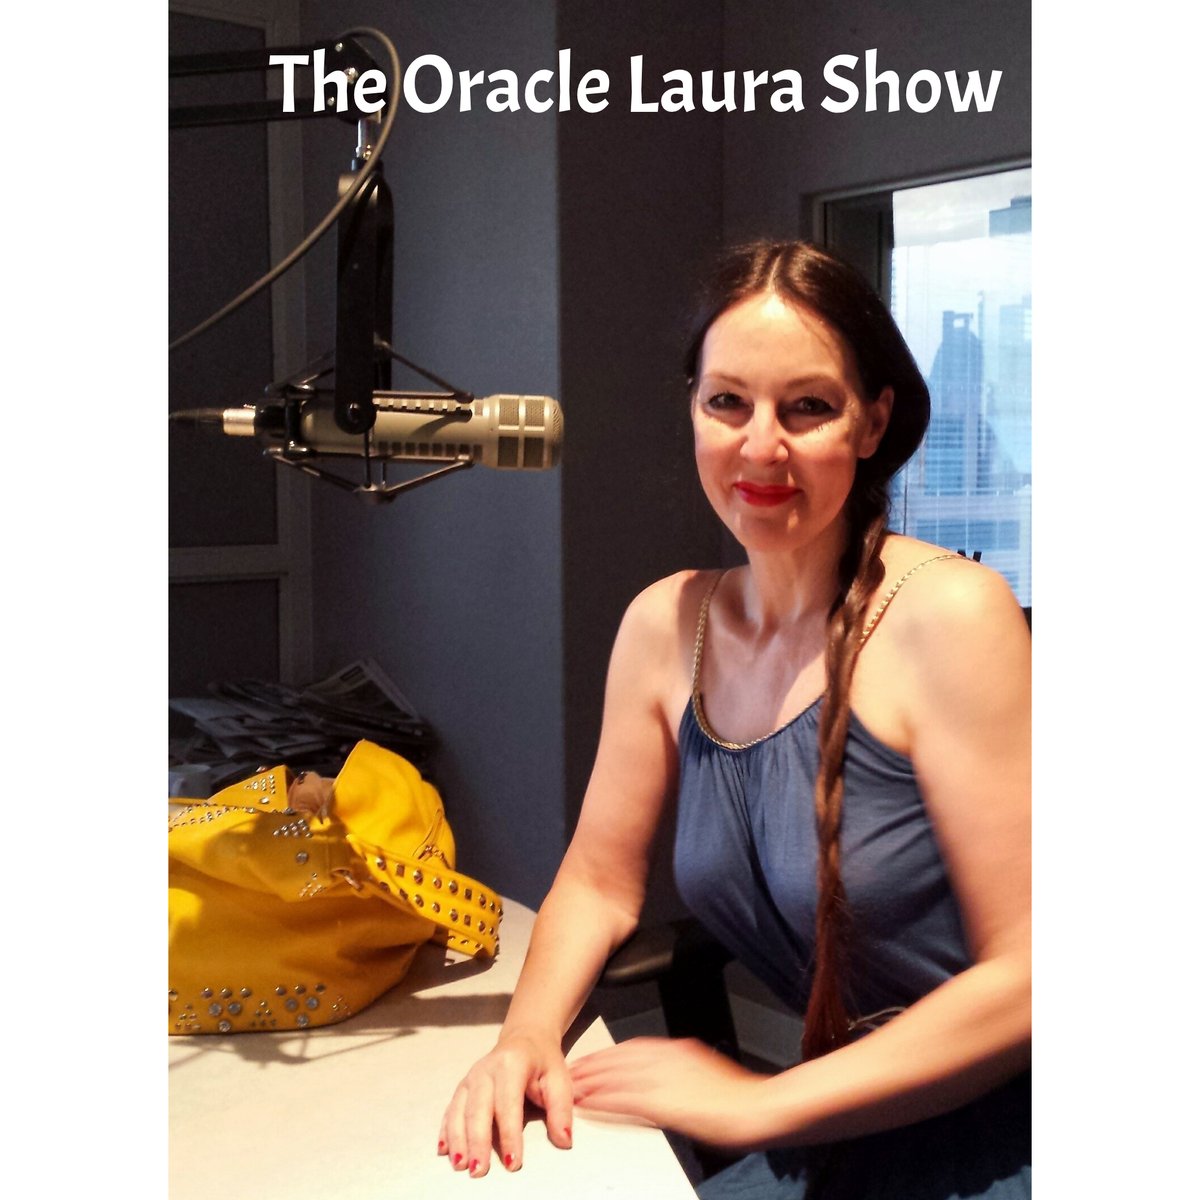 Stay tuned in!

#podcast #podcastlife #podcastersunite #radioshow #video #videoshow #liveshow #showhost #entertainment #entertainer #performer #oraclelaura #oraclelaurashow #theoraclelaurashow #psychicmedium #psychic